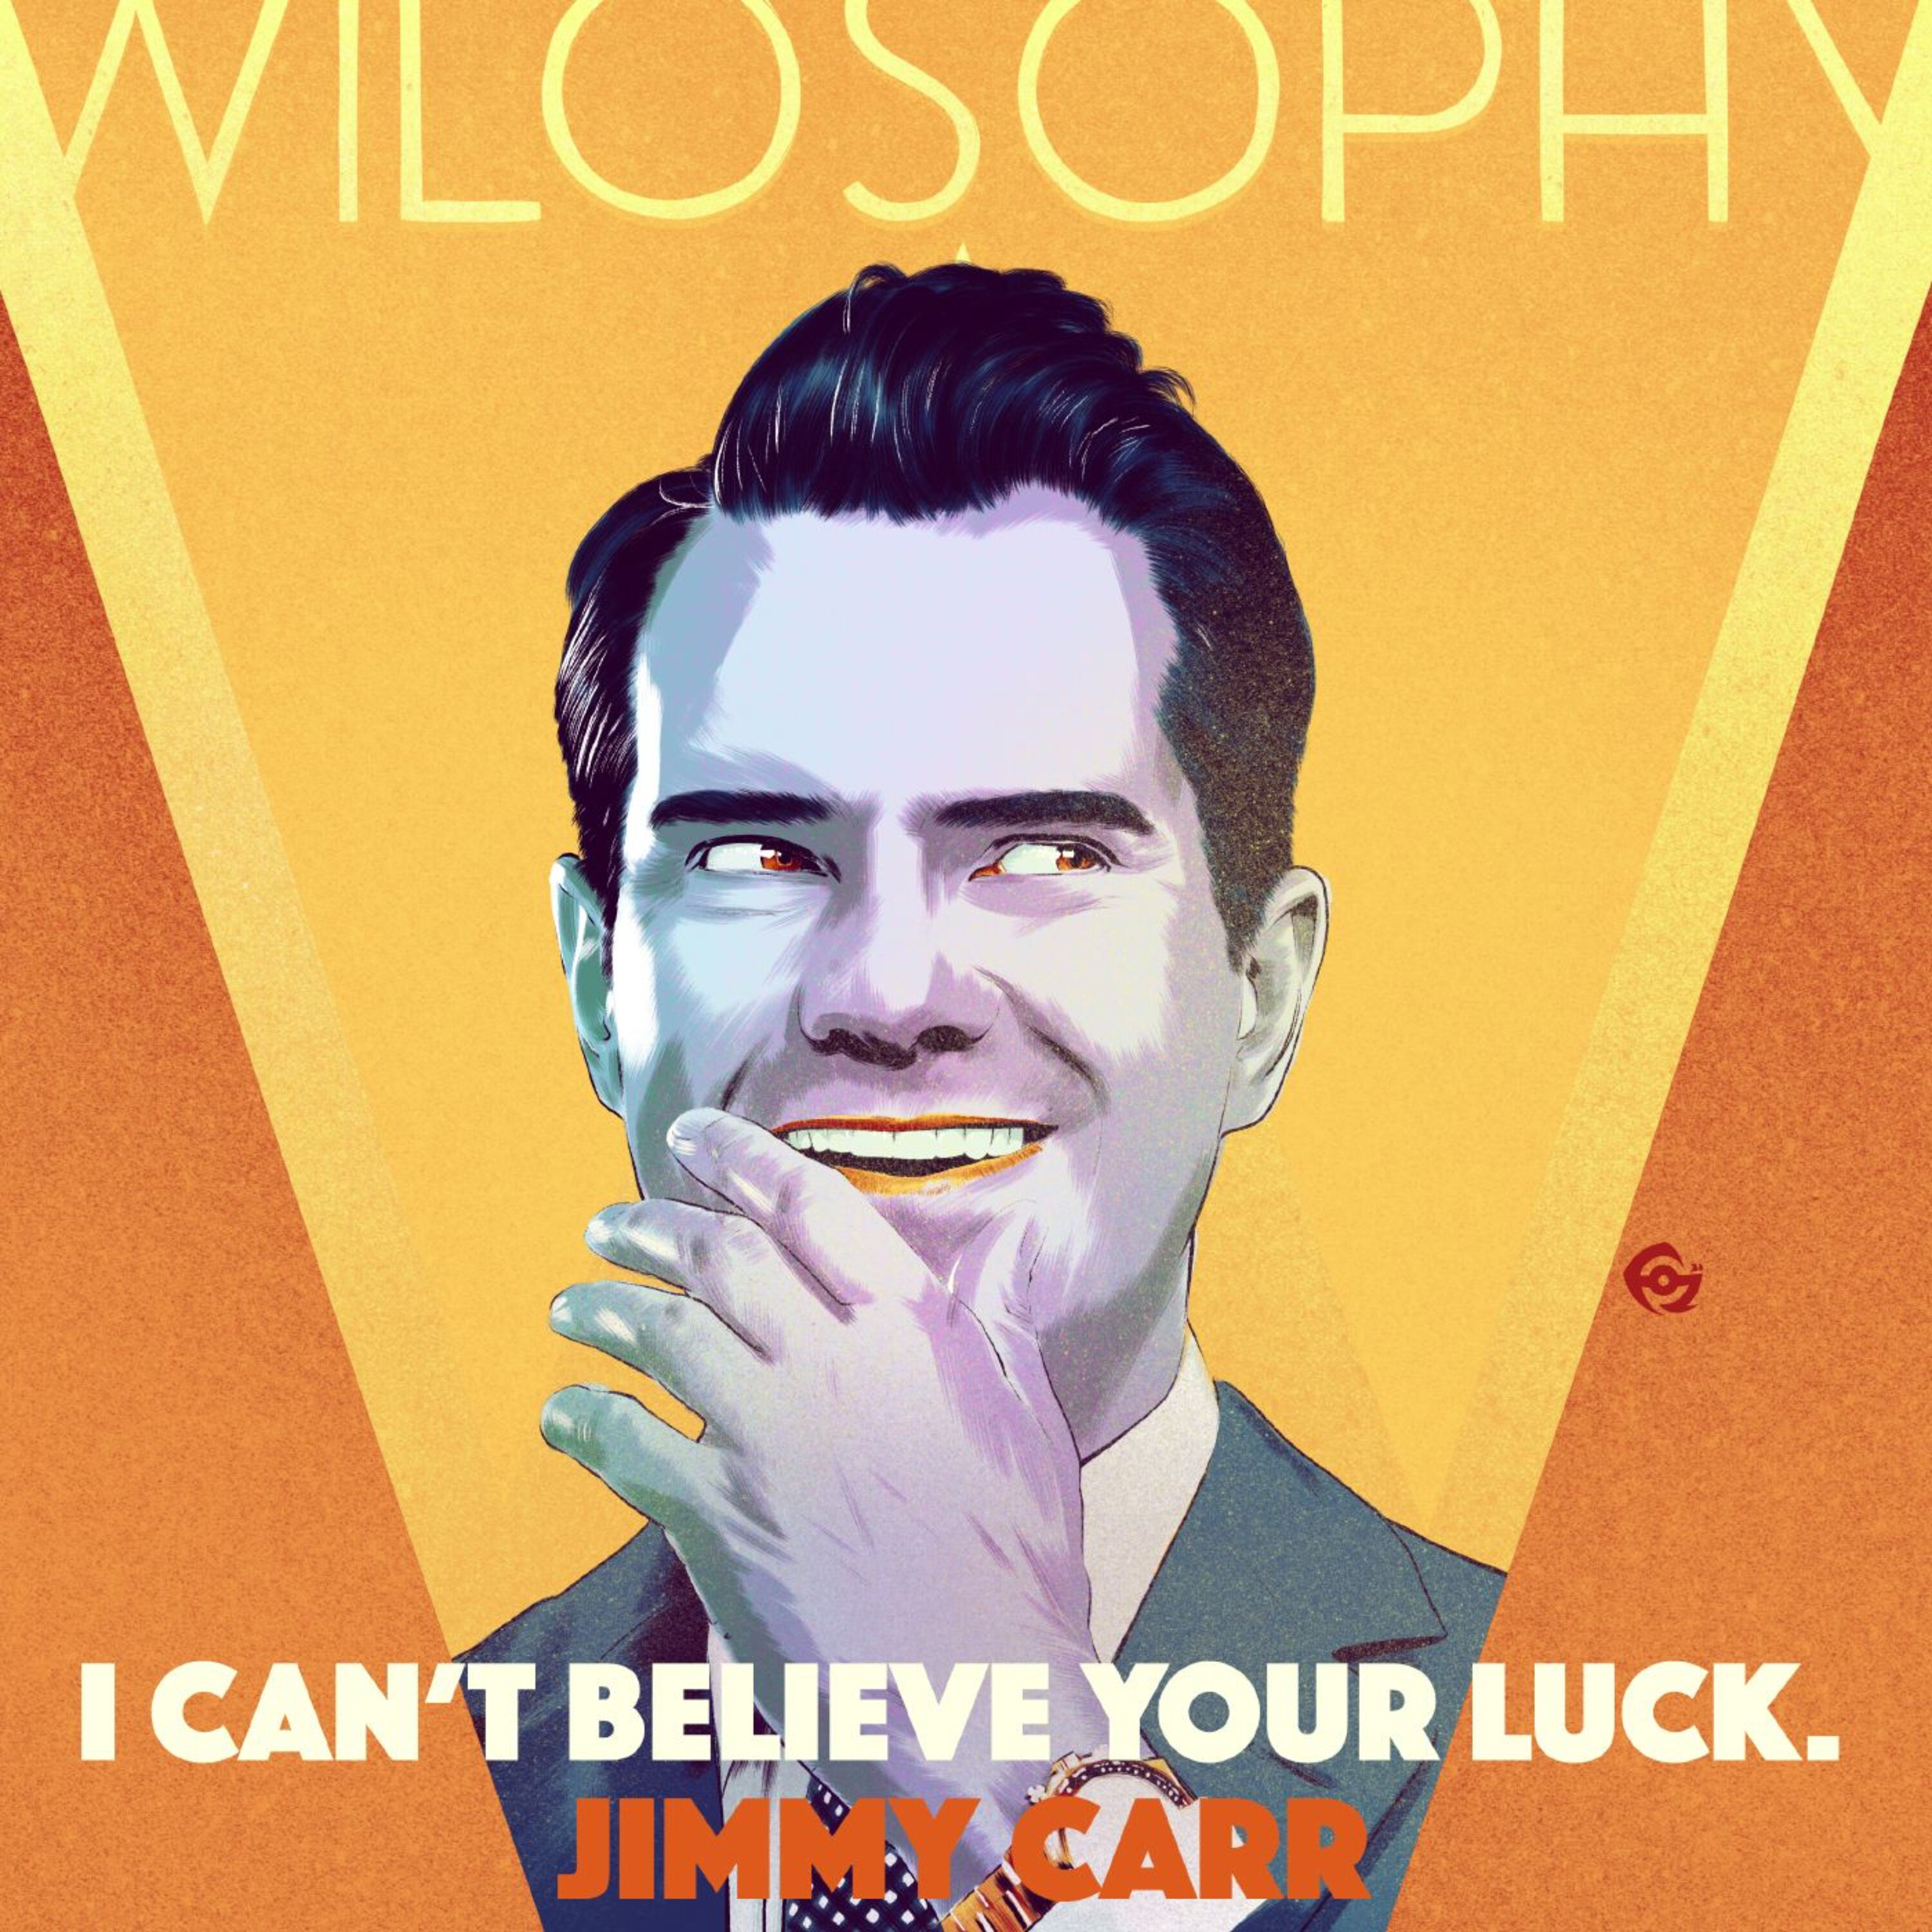 WILOSOPHY with Jimmy Carr